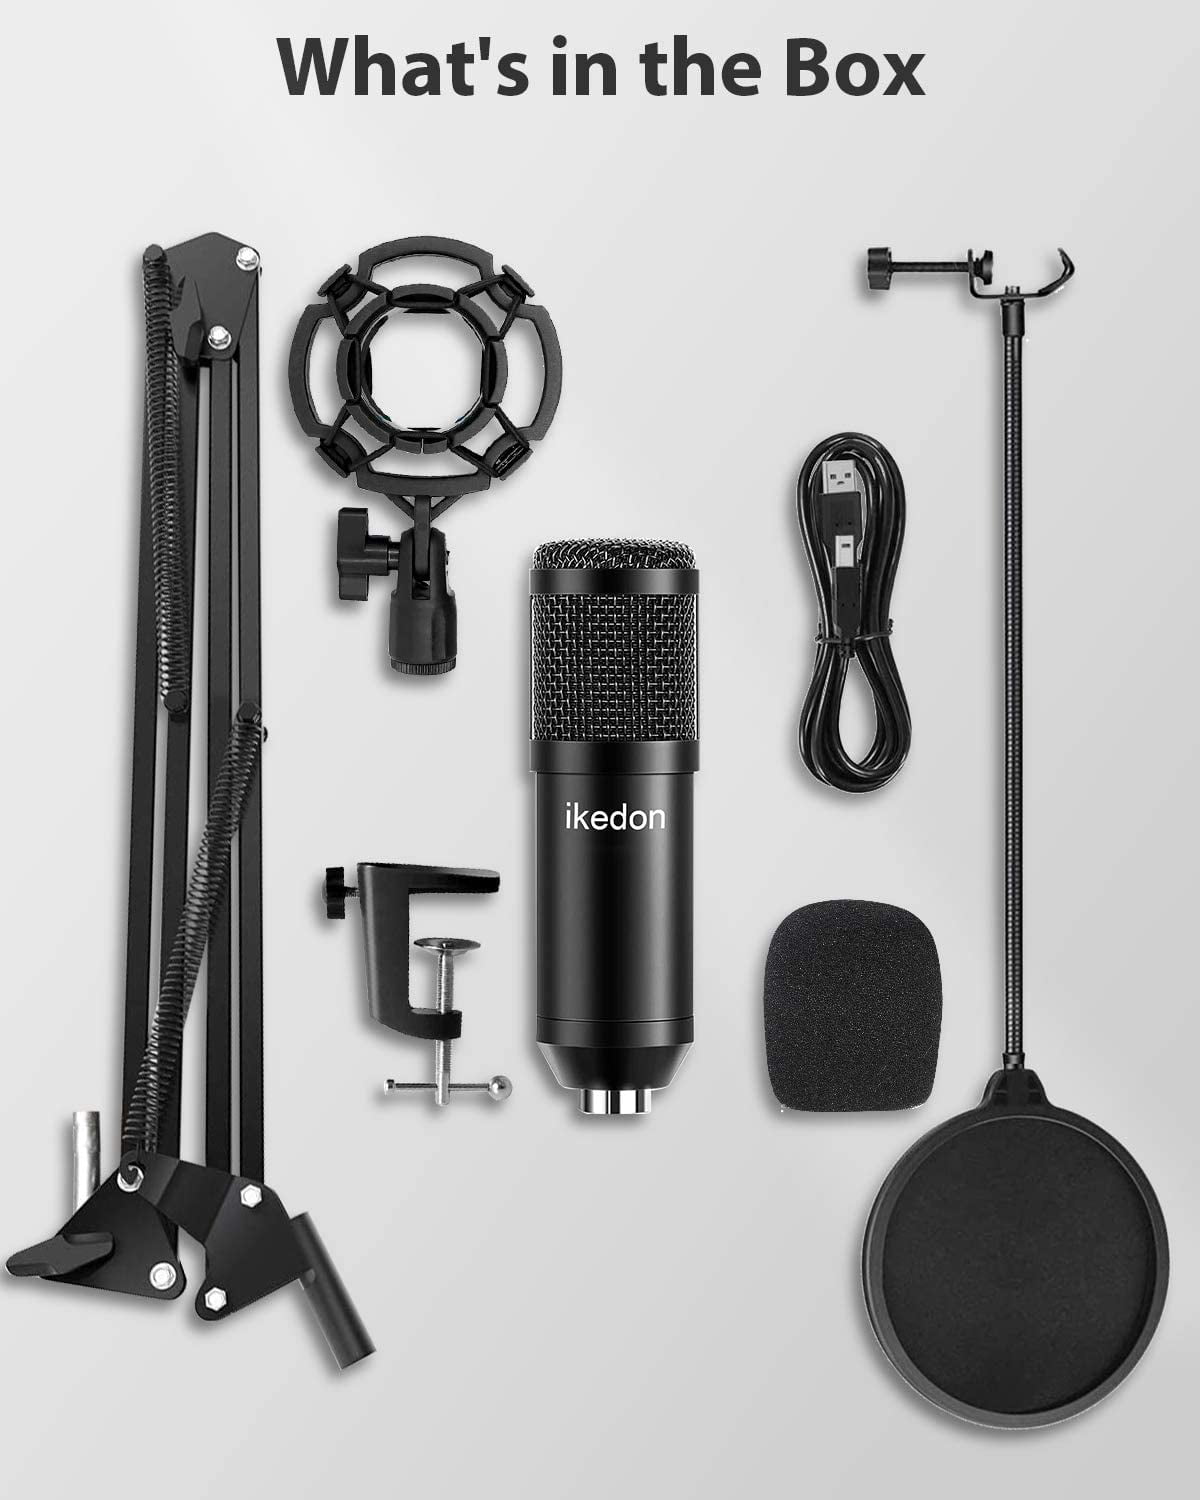 USB Microphone Kit with Professional Sound Chipset Boom Arm Set USB Condenser Microphone IKEDON 192KHZ/24Bit Plug & Play PC Streaming Mic Studio Cardioid Mic for Recording YouTube Gaming Podcasting